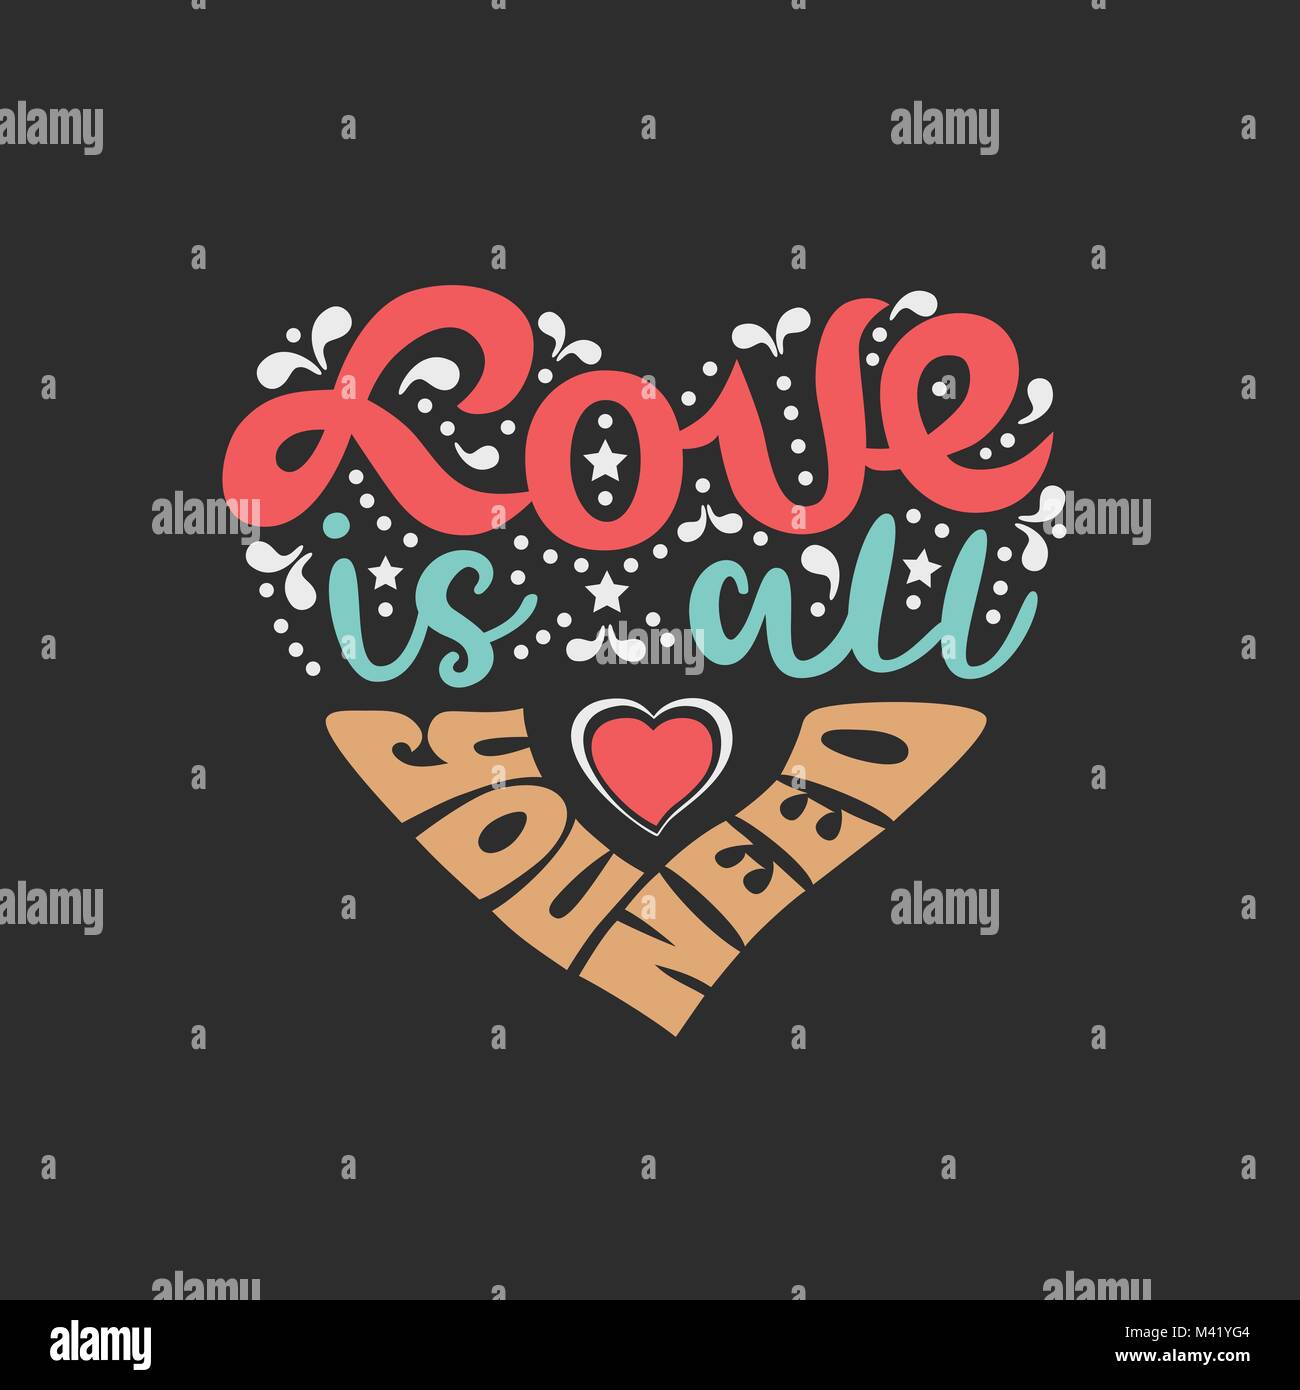 All you need is love. Stock Vector